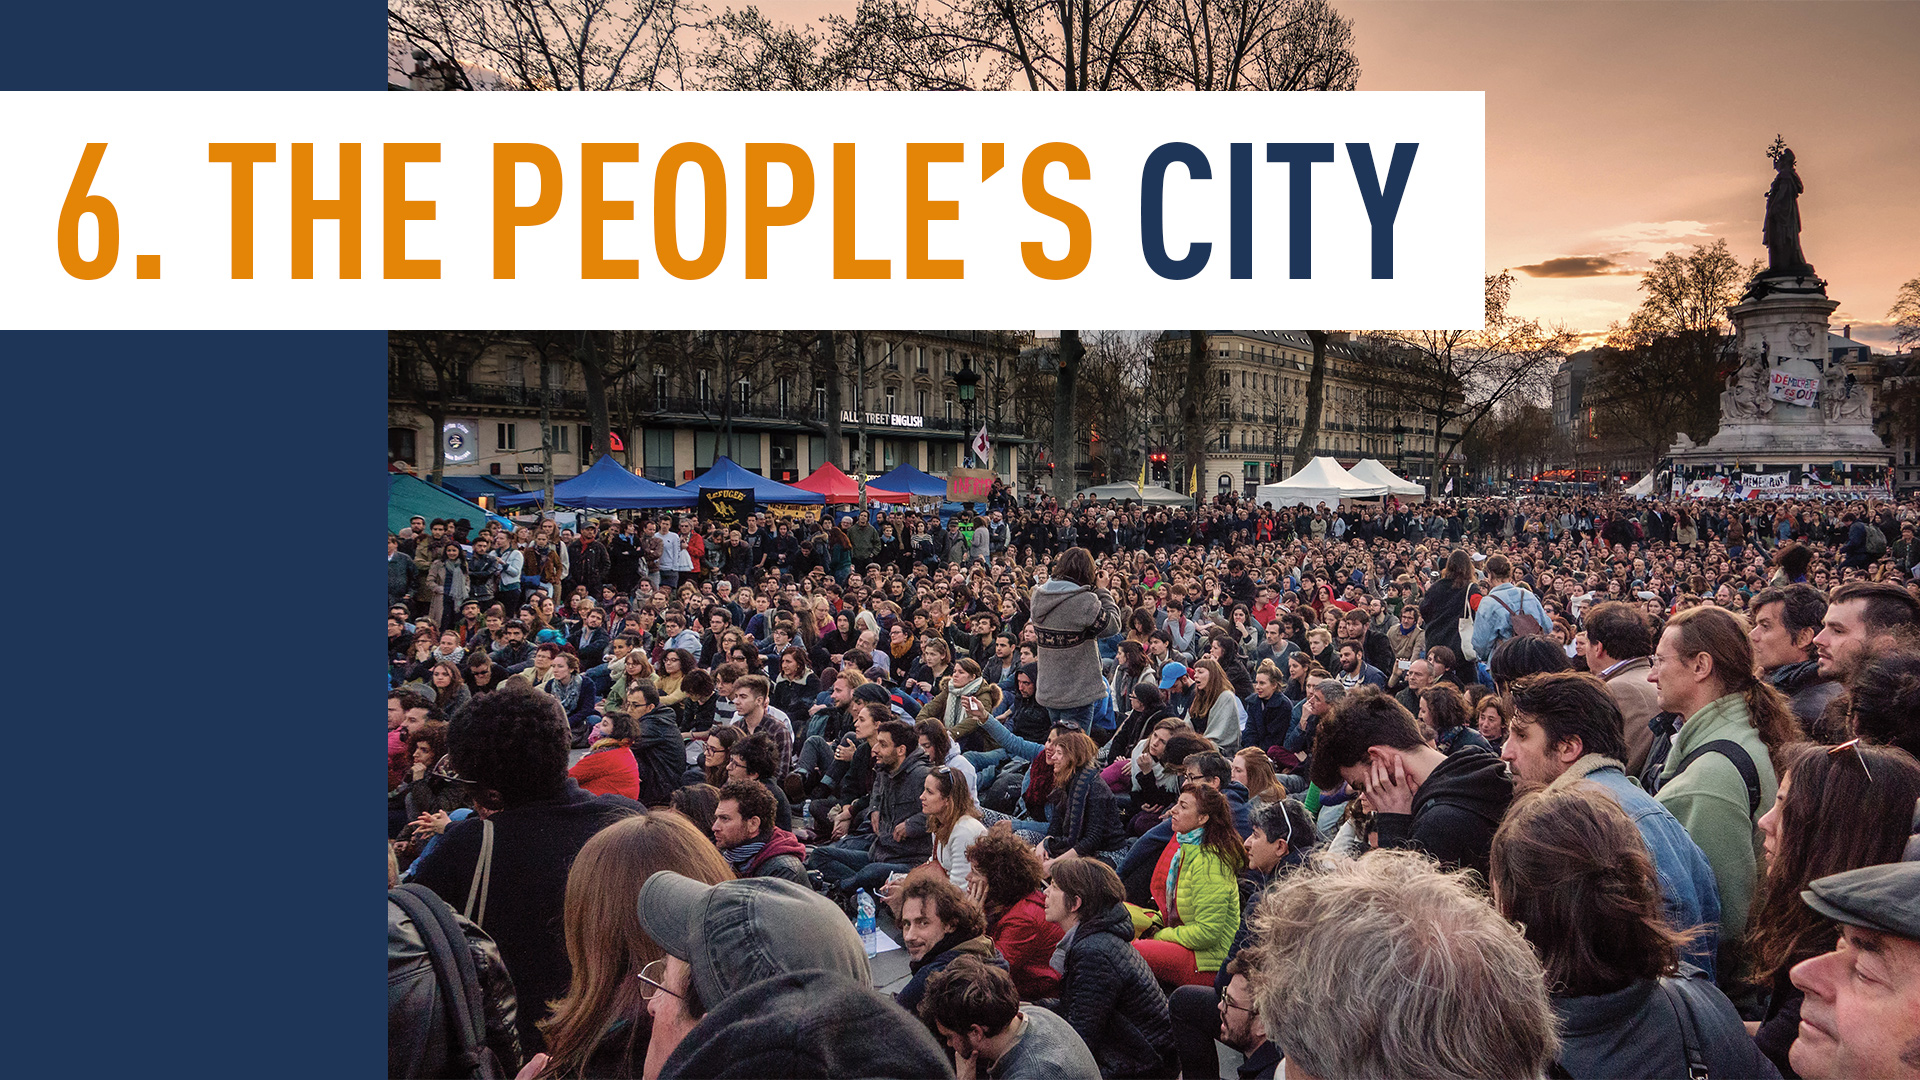 THE PEOPLE’S CITY